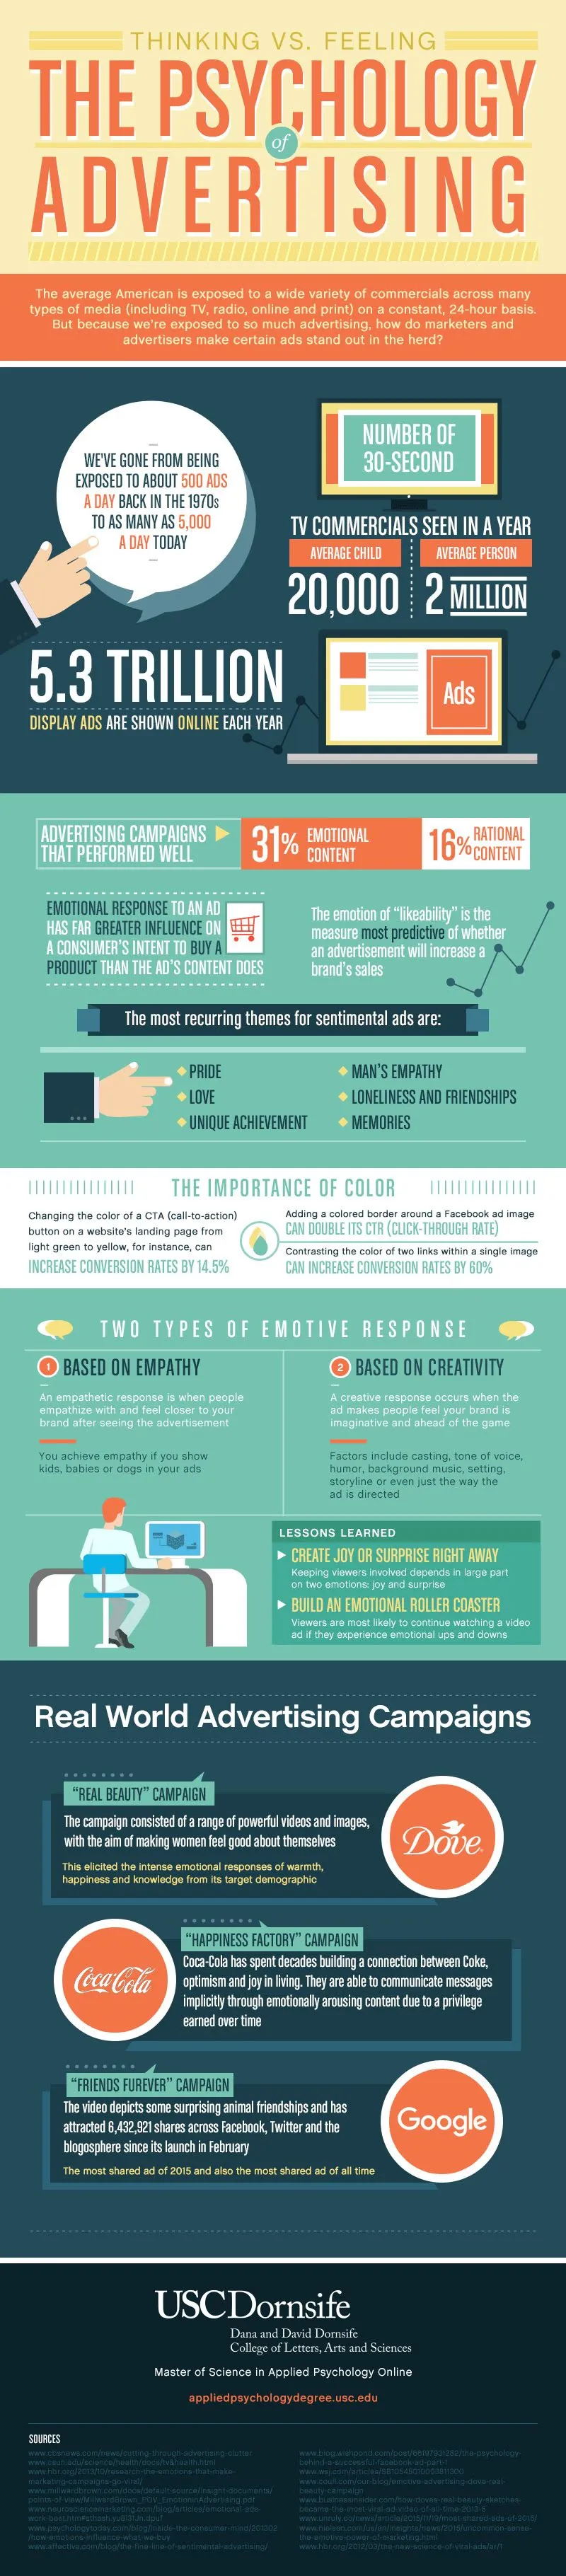 Thinking vs Feeling: The Psychology of Advertising #infographic